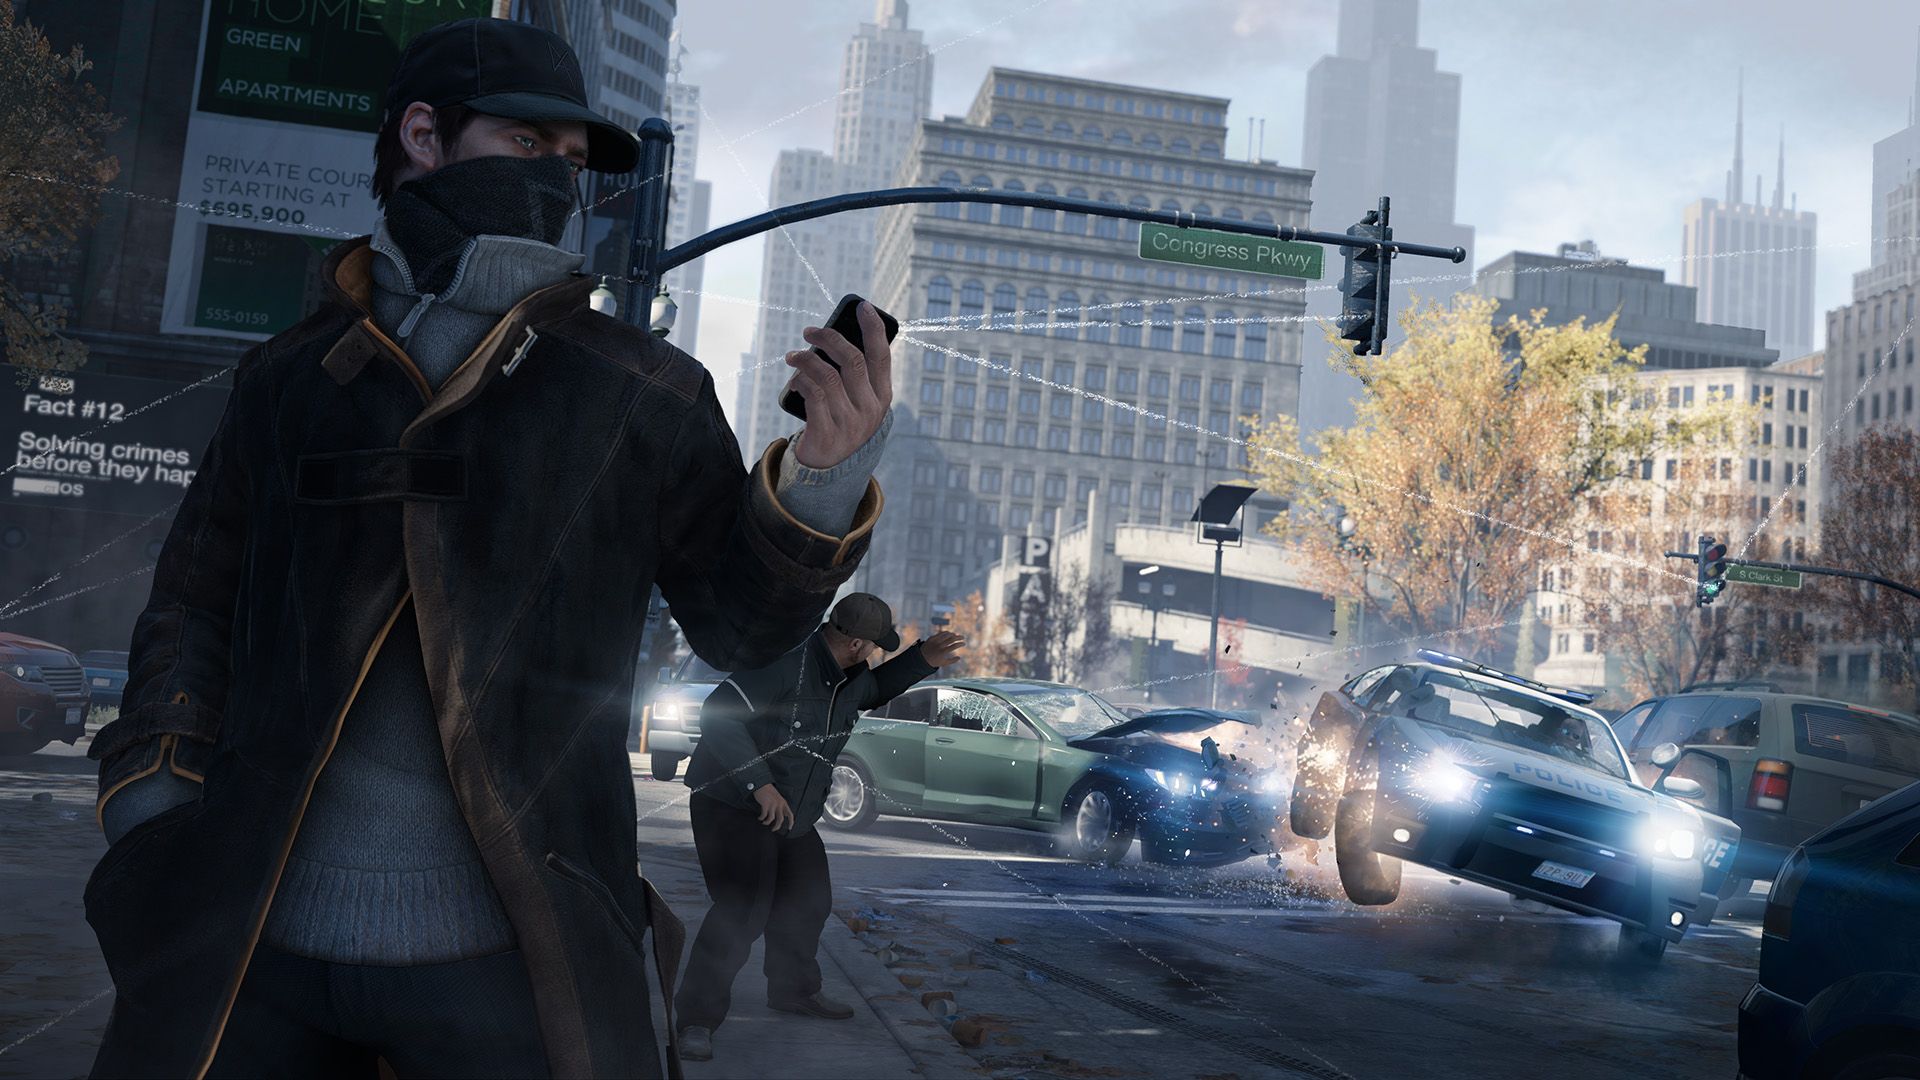 watch dogs developer it s not the consoles that will define next gen gaming it s the people  image 1